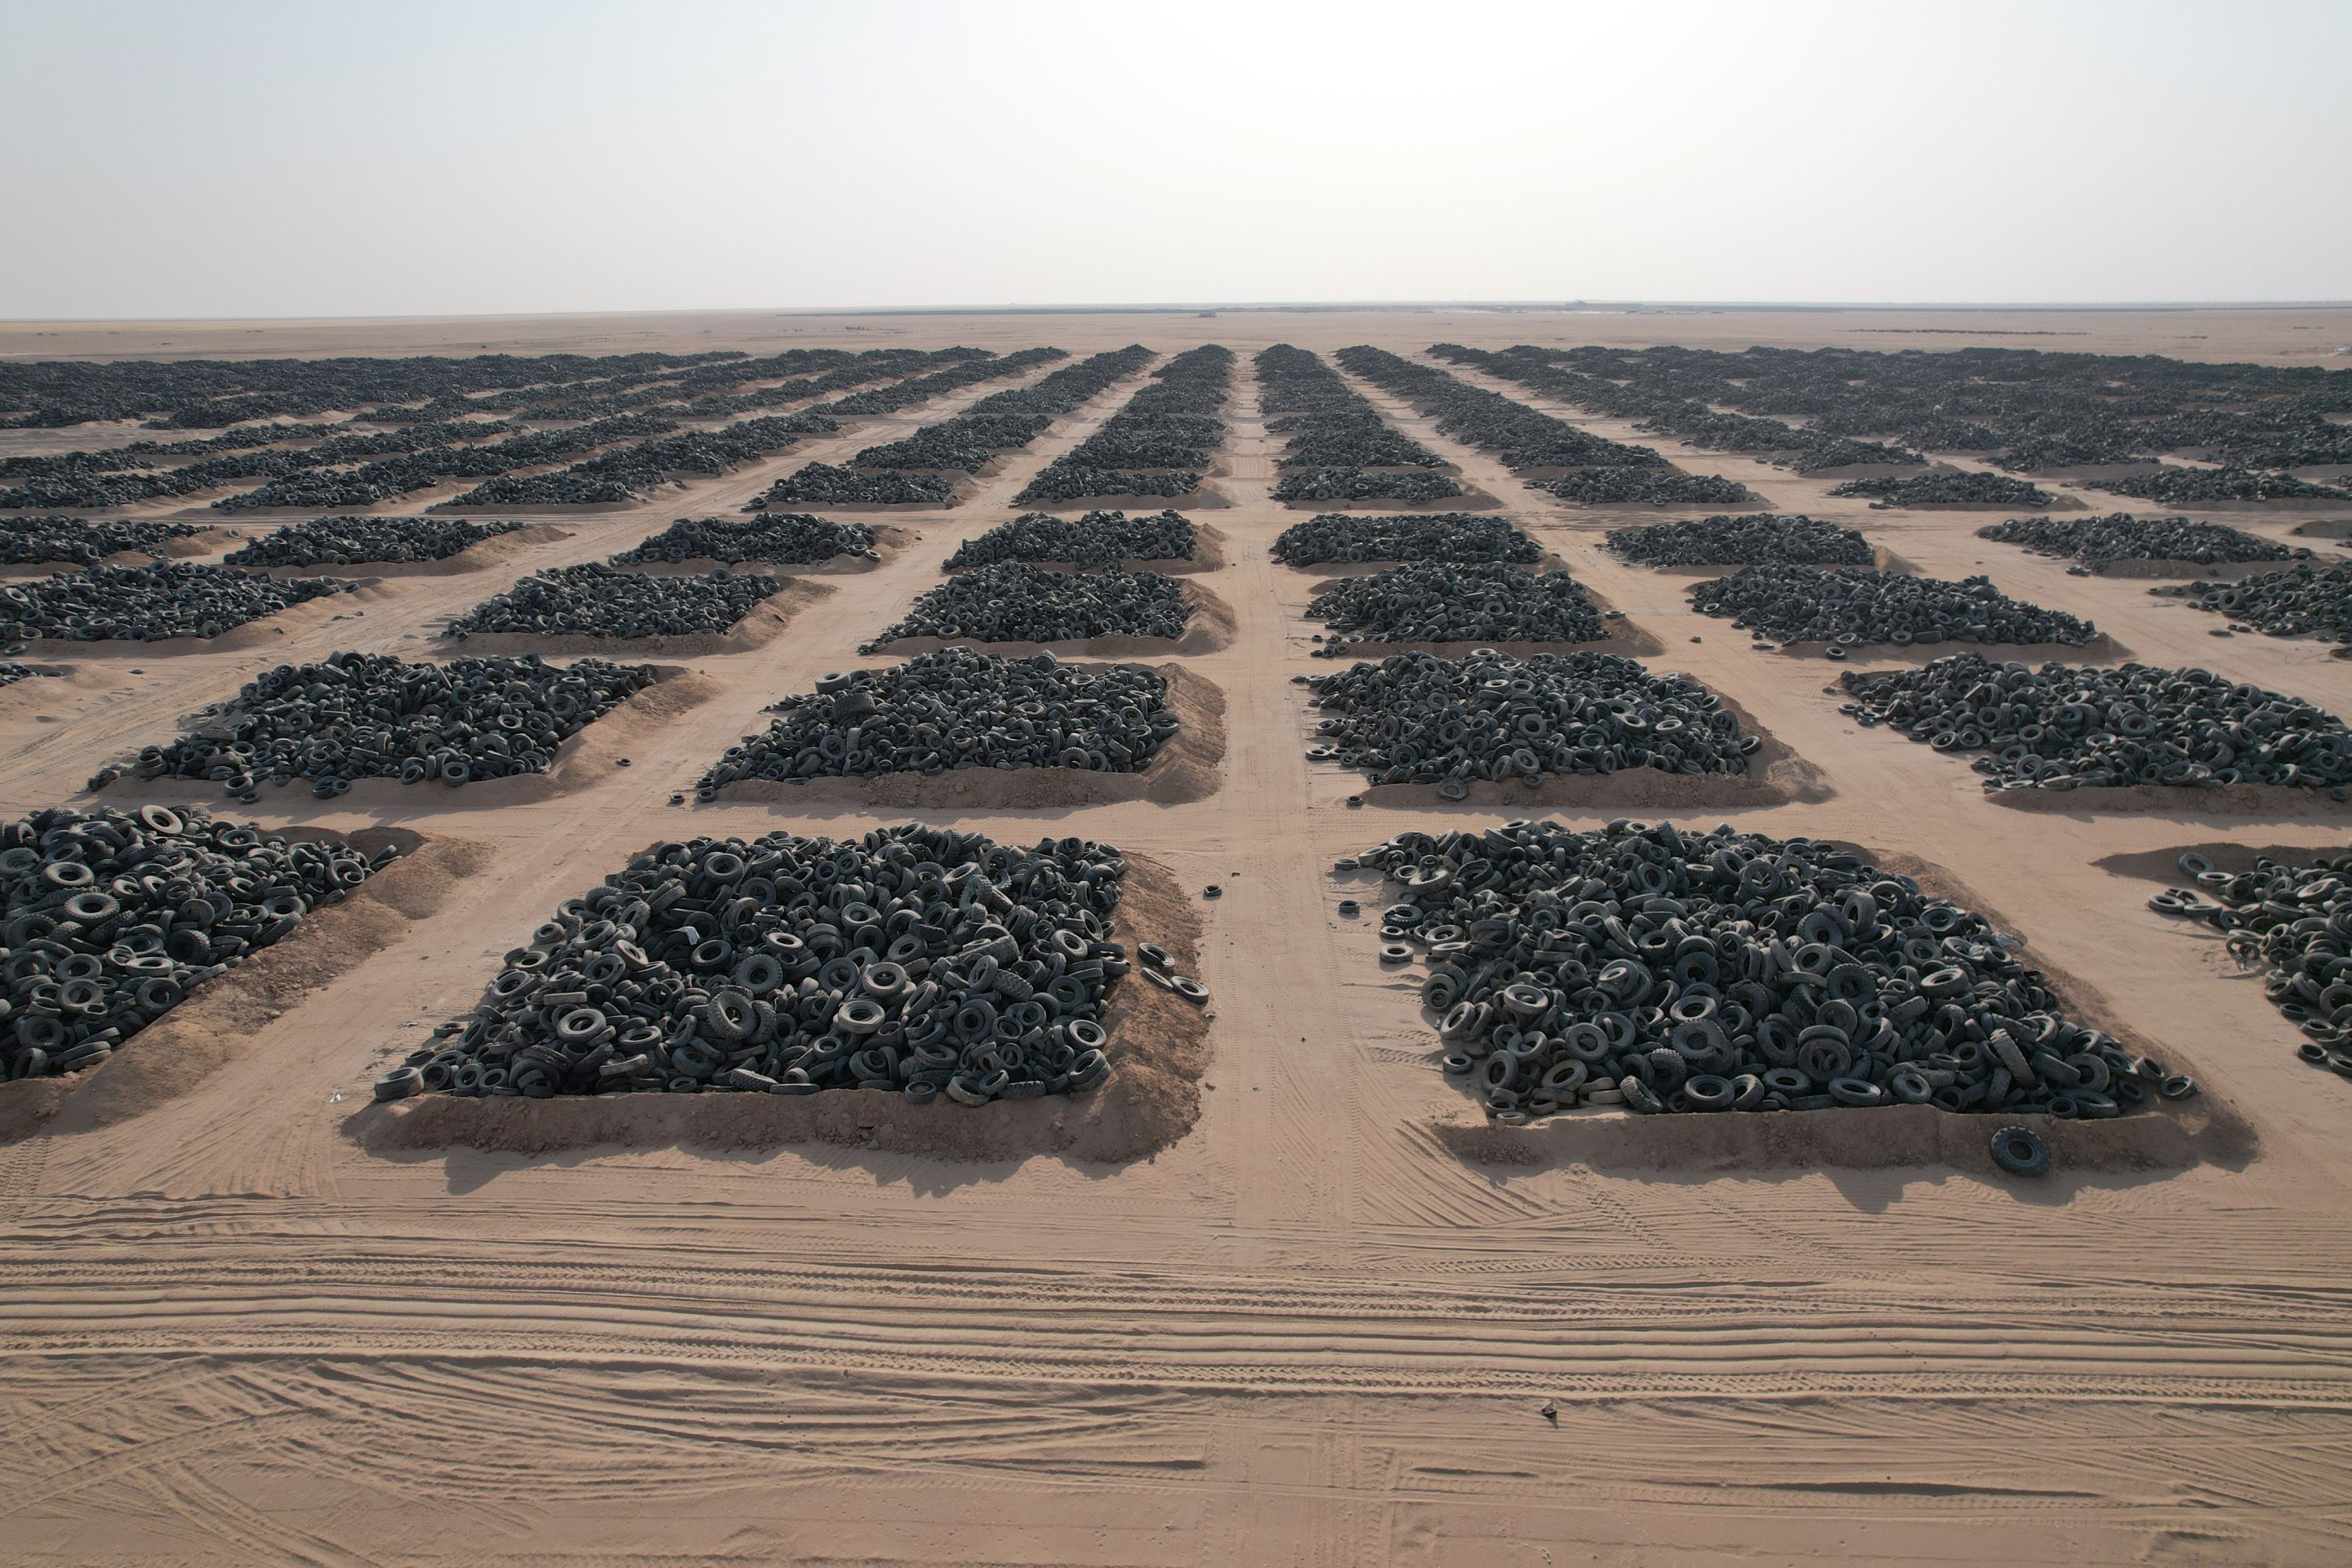 A tire graveyard with 50 million dumped tires poses environmental and health risks. (AA Photo)